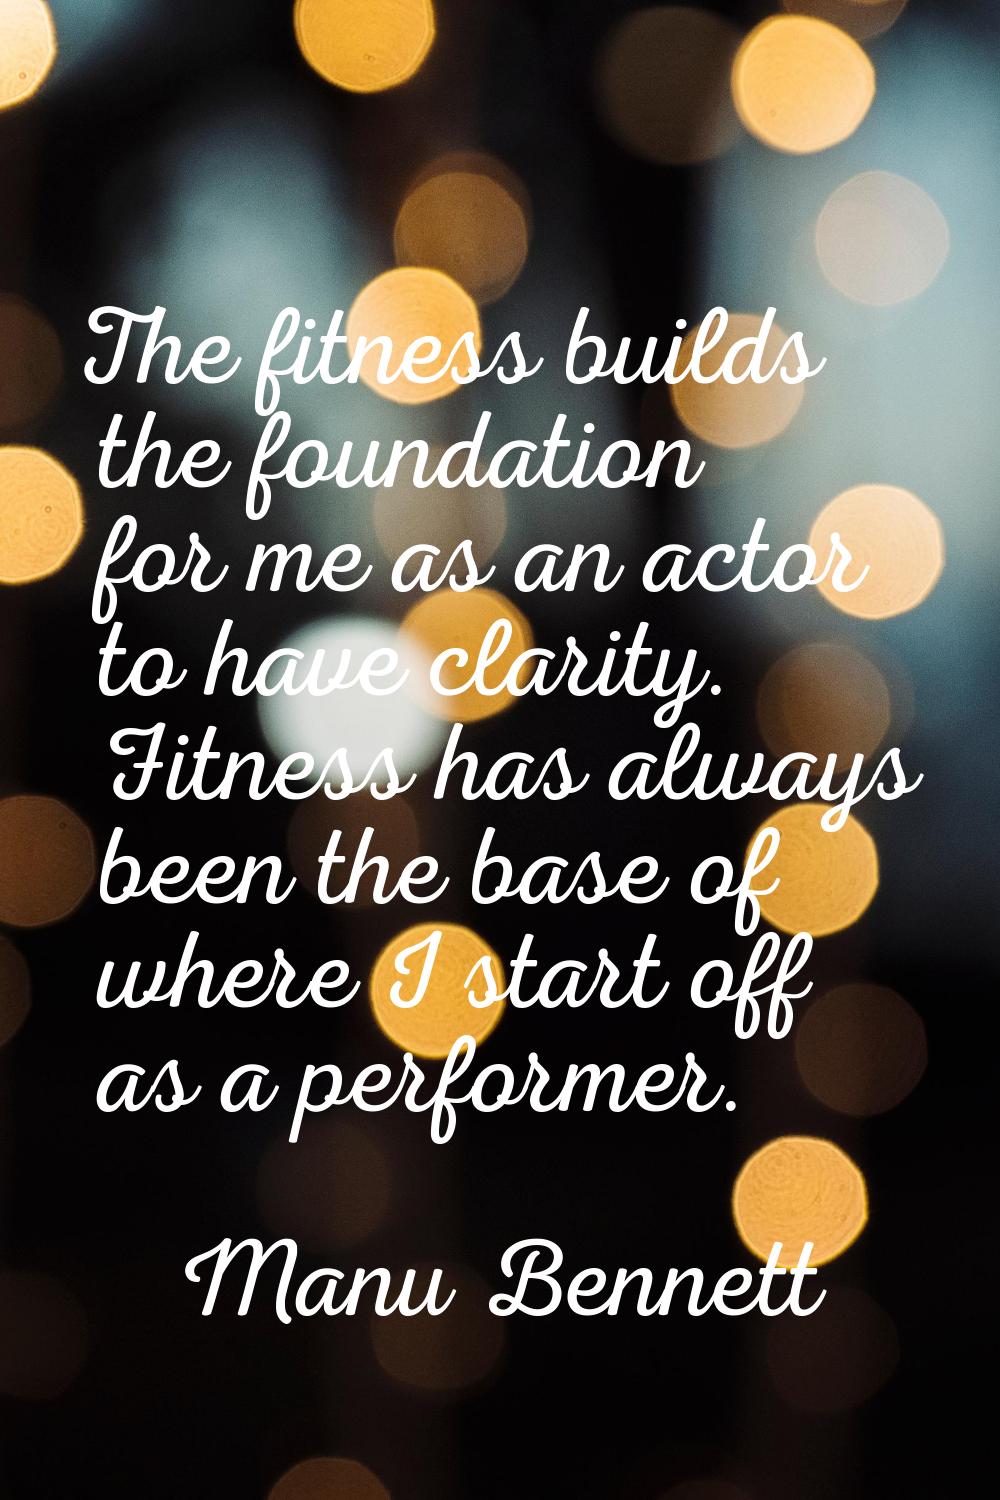 The fitness builds the foundation for me as an actor to have clarity. Fitness has always been the b